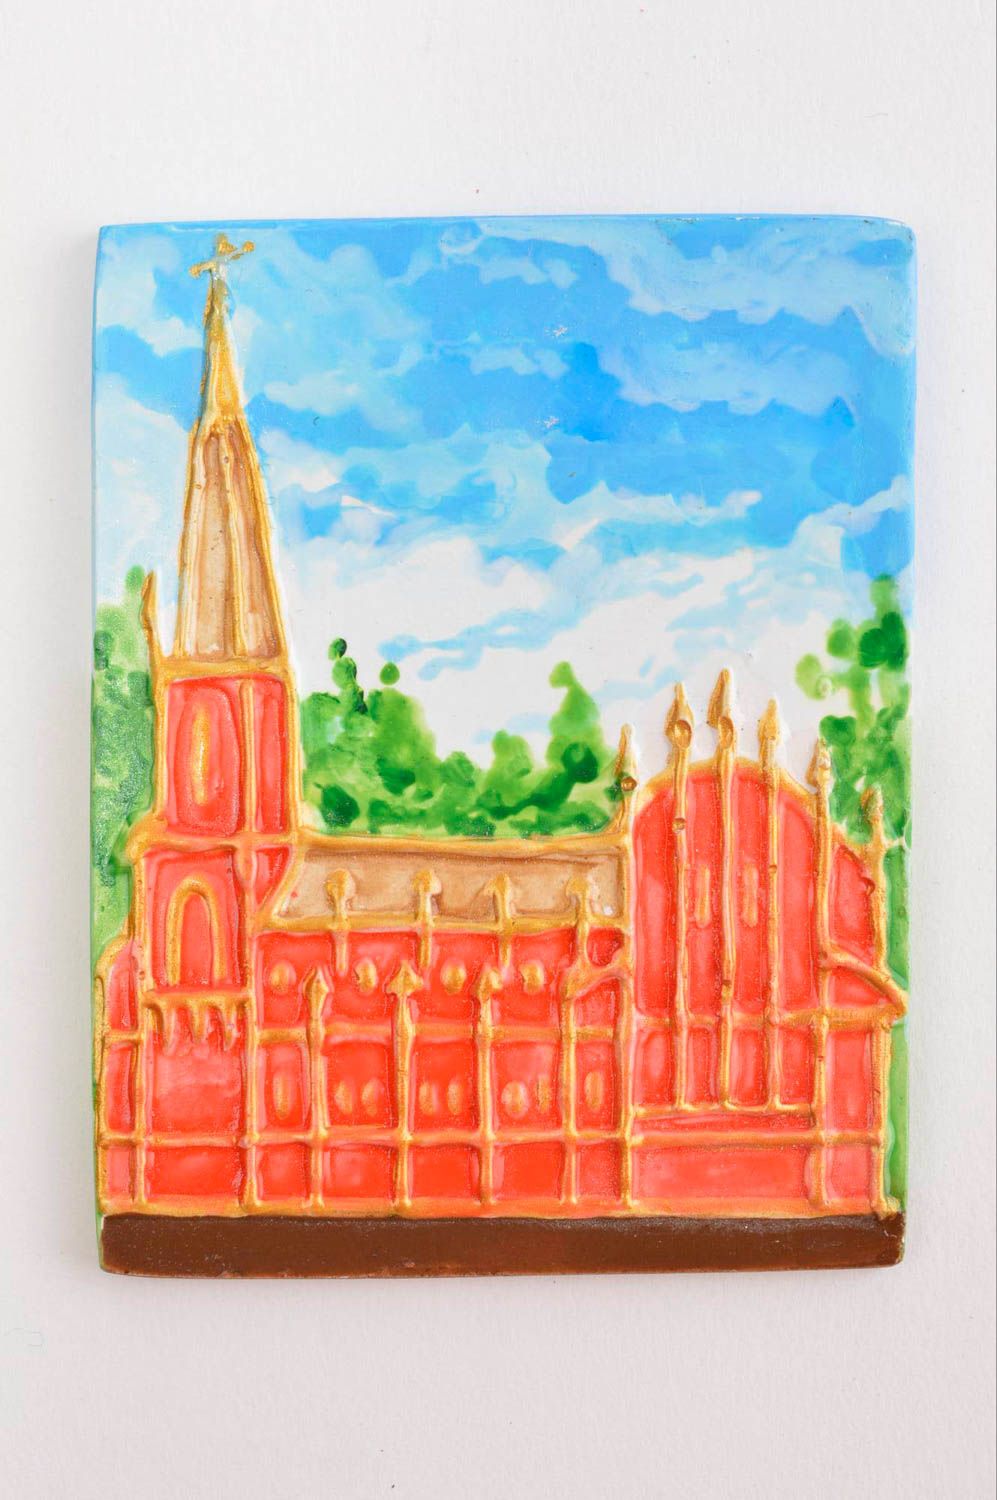 Fridge magnet cathedral unusual handmade present decorative use only home decor photo 2